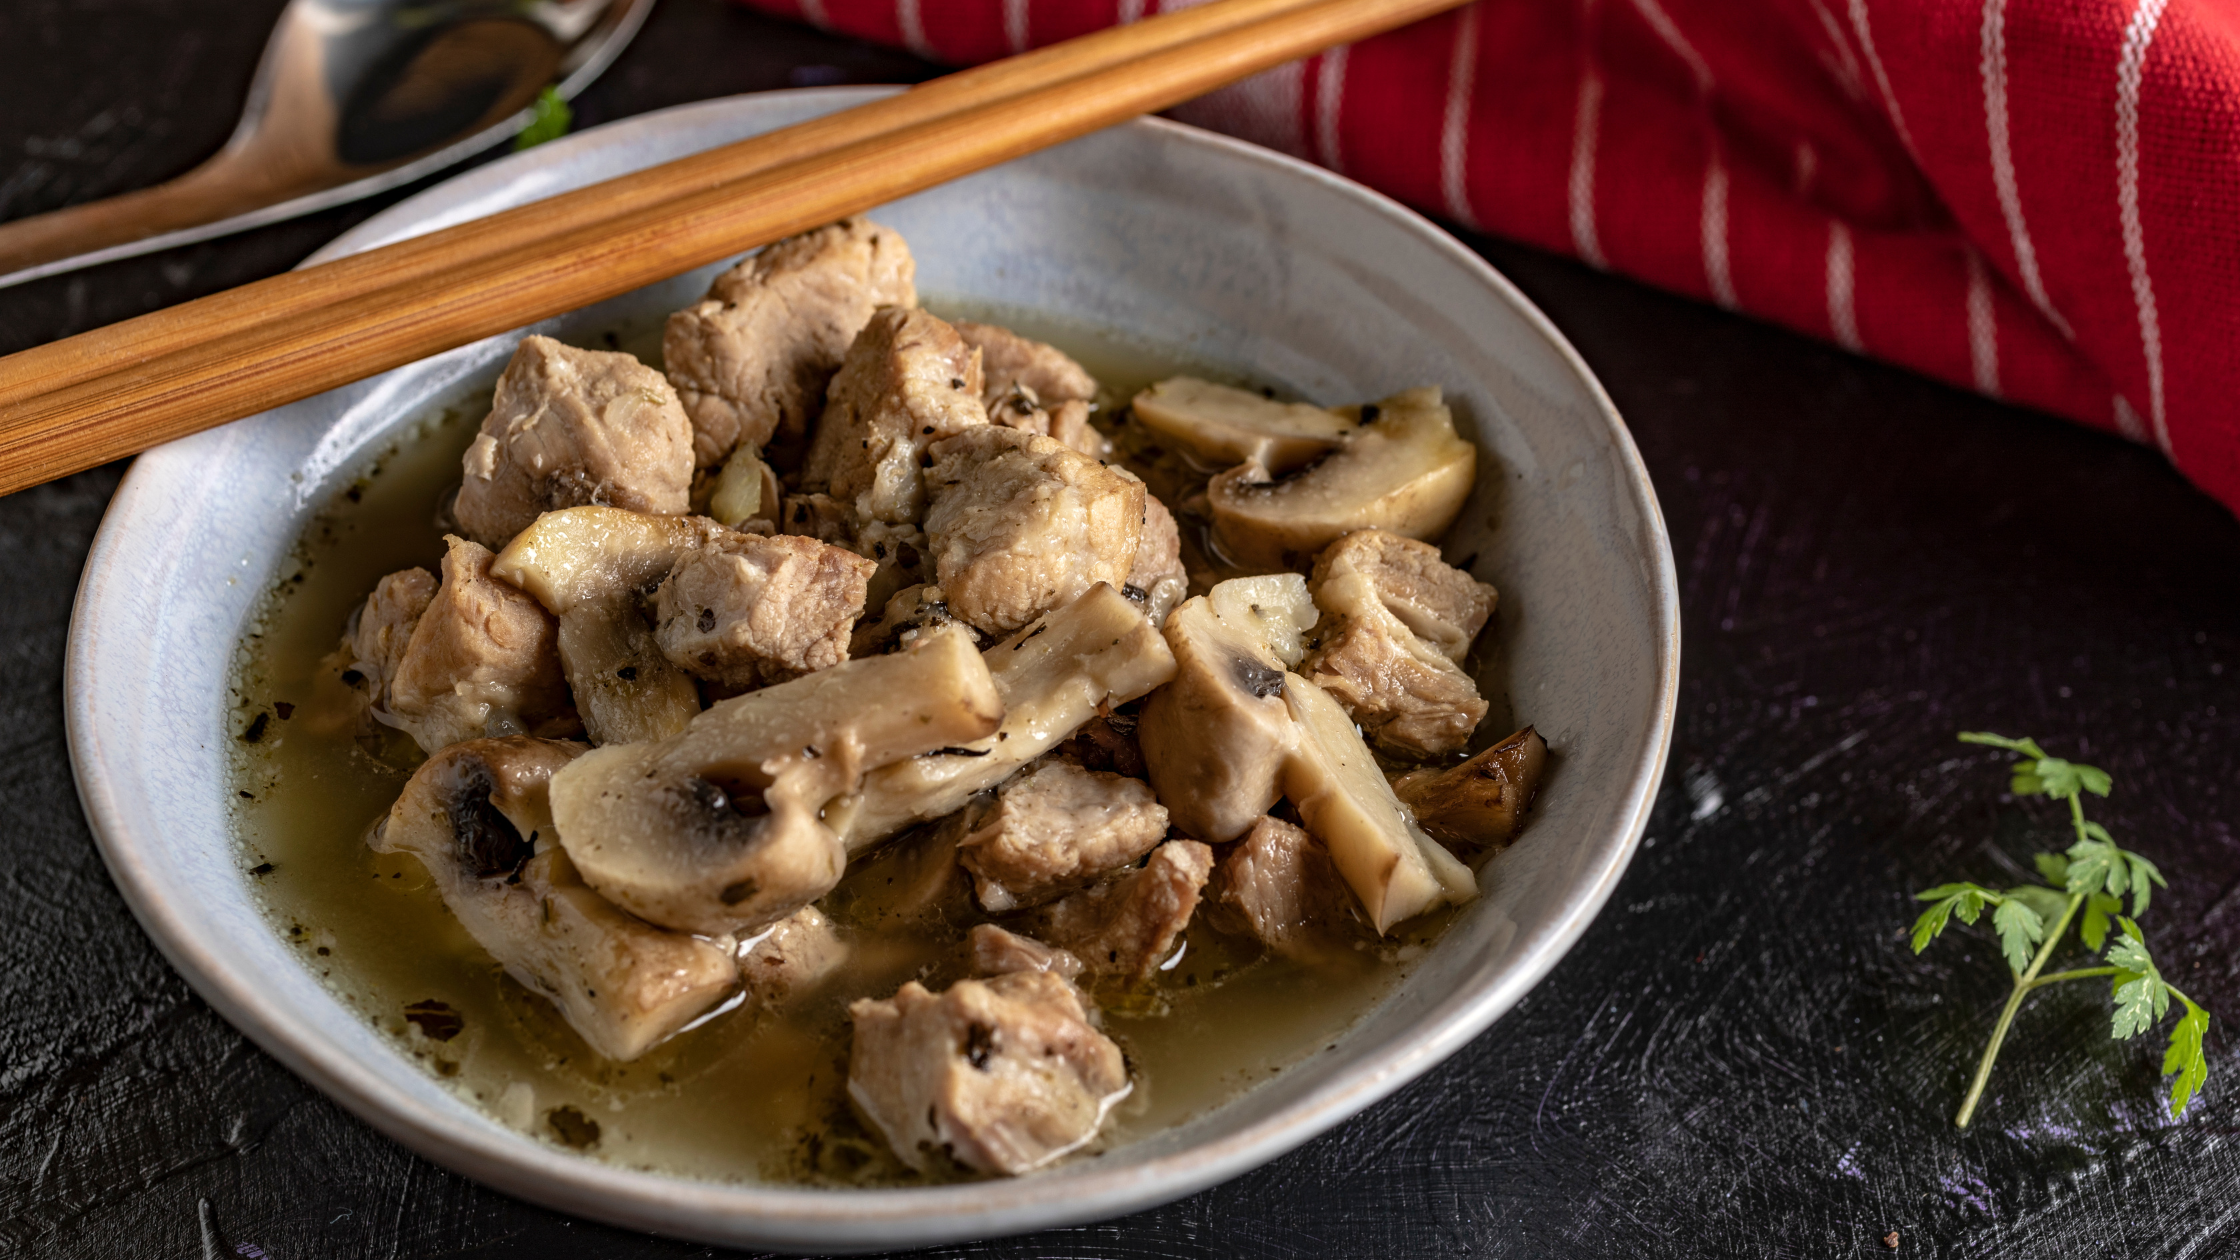 Pork fillet with mushroom sauce in a bowl with chopsticks